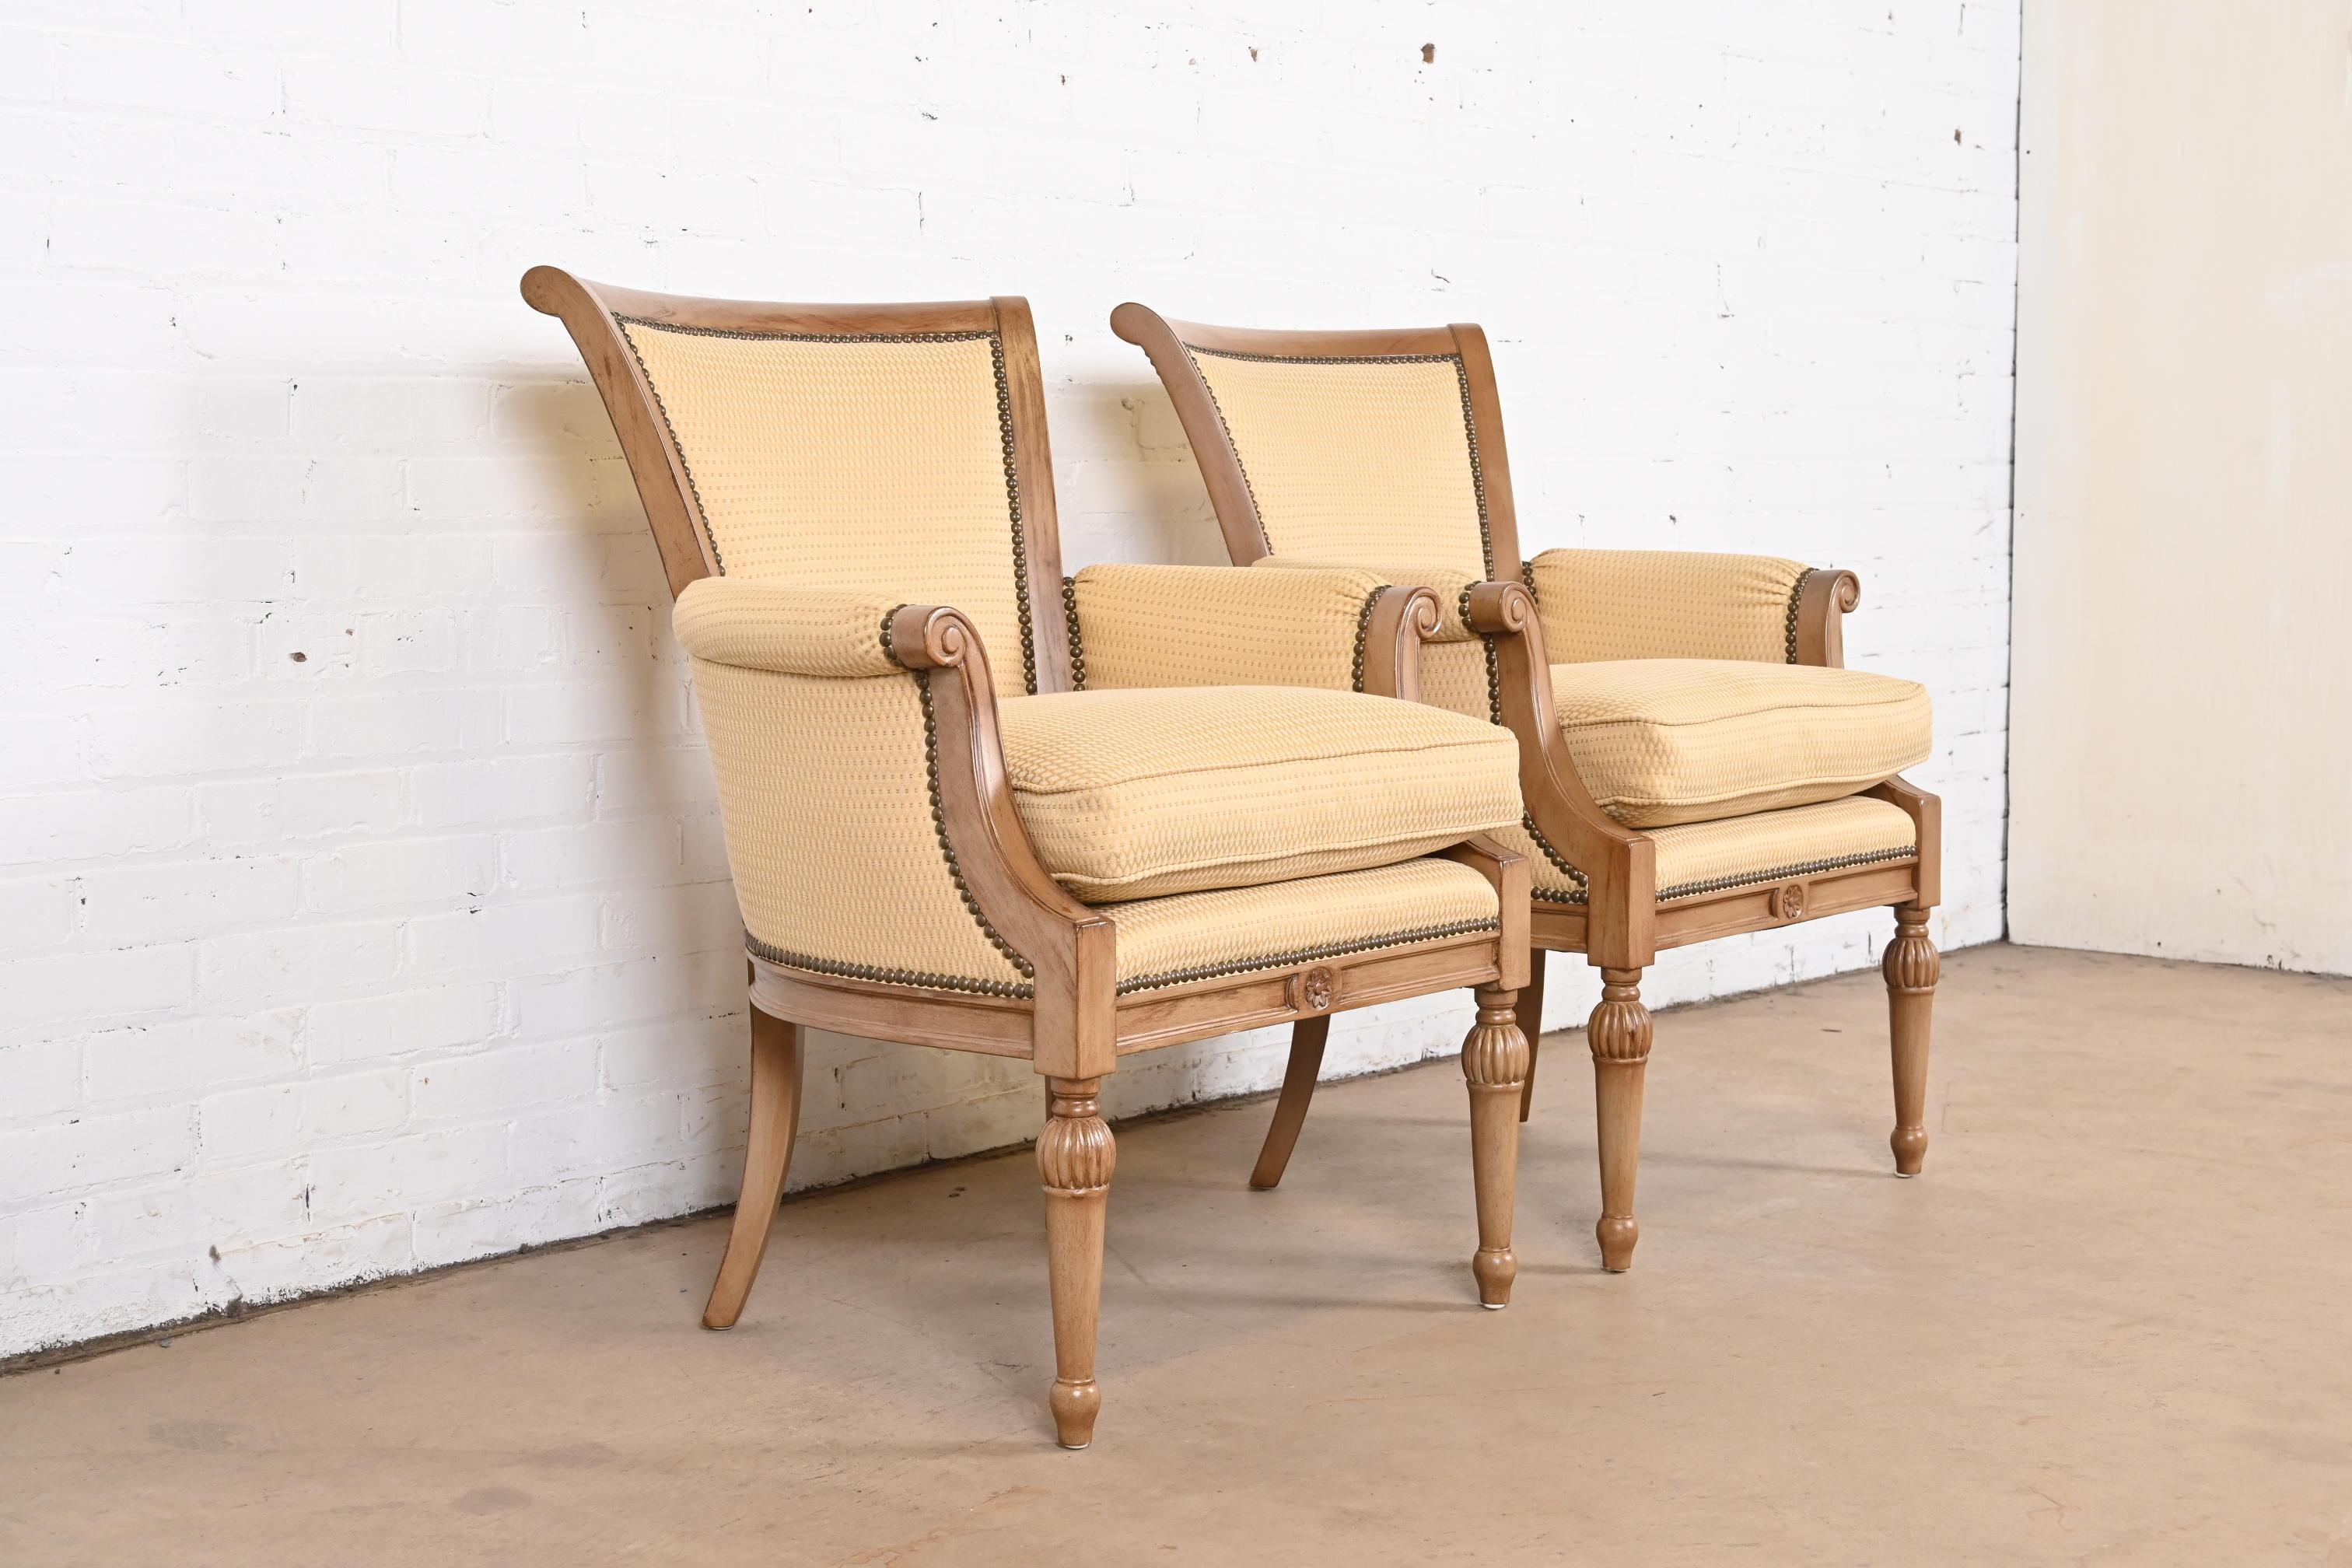 20th Century Barbara Barry for Henredon French Regency Louis XVI Bergere Chairs, Pair For Sale